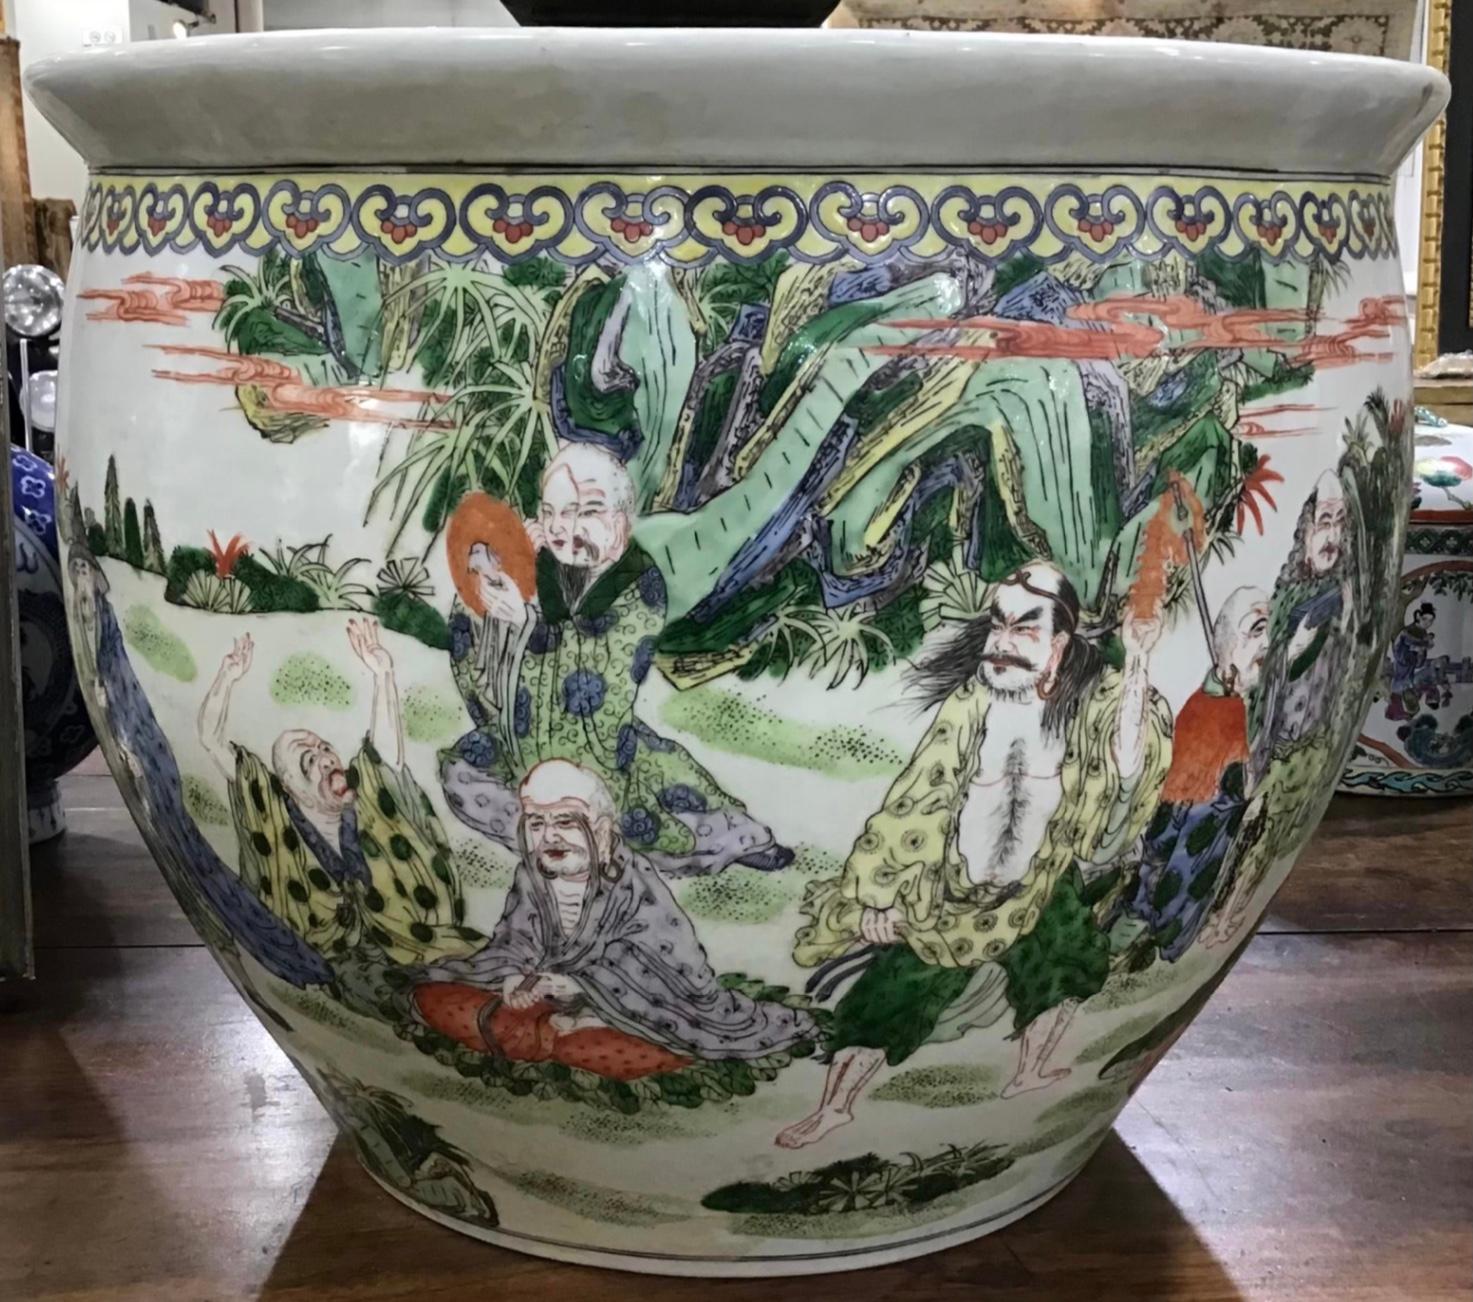 Large Chinese Porcelain Famille Verte Fish Bowl Planter In Good Condition For Sale In Bradenton, FL